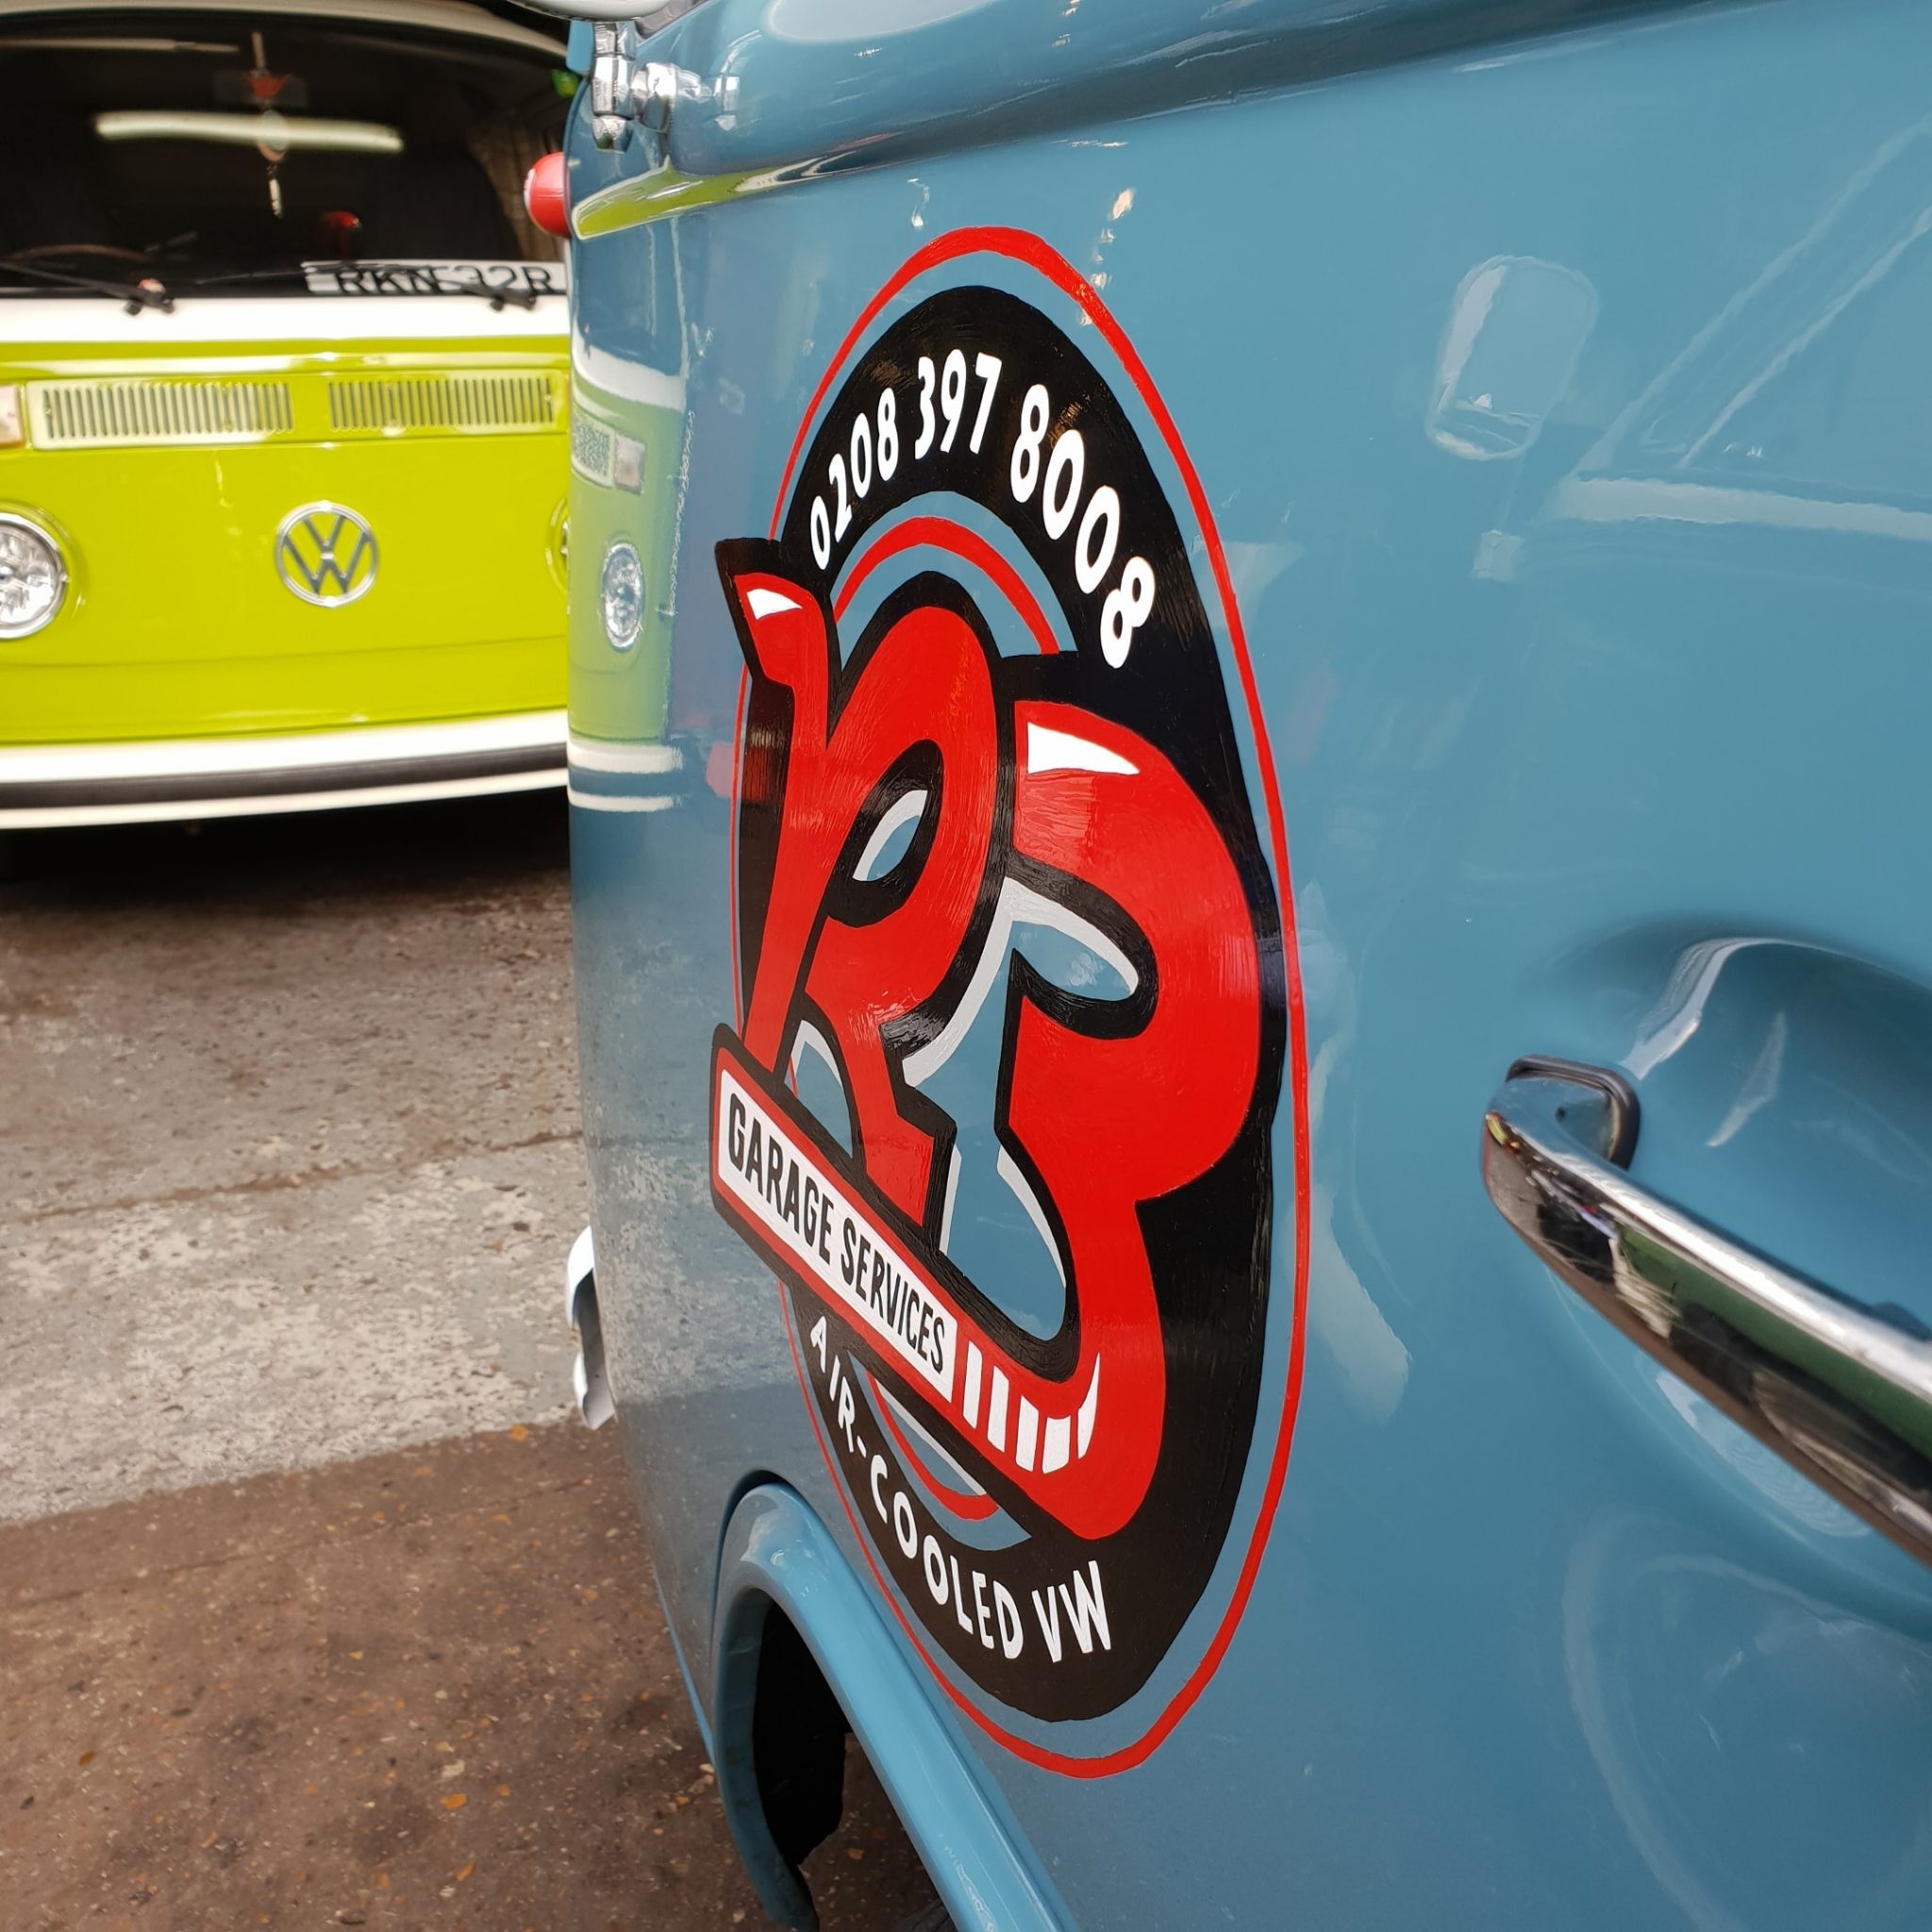 R3 Garage Services | Surrey | Aircooled & Classic VW Specialists